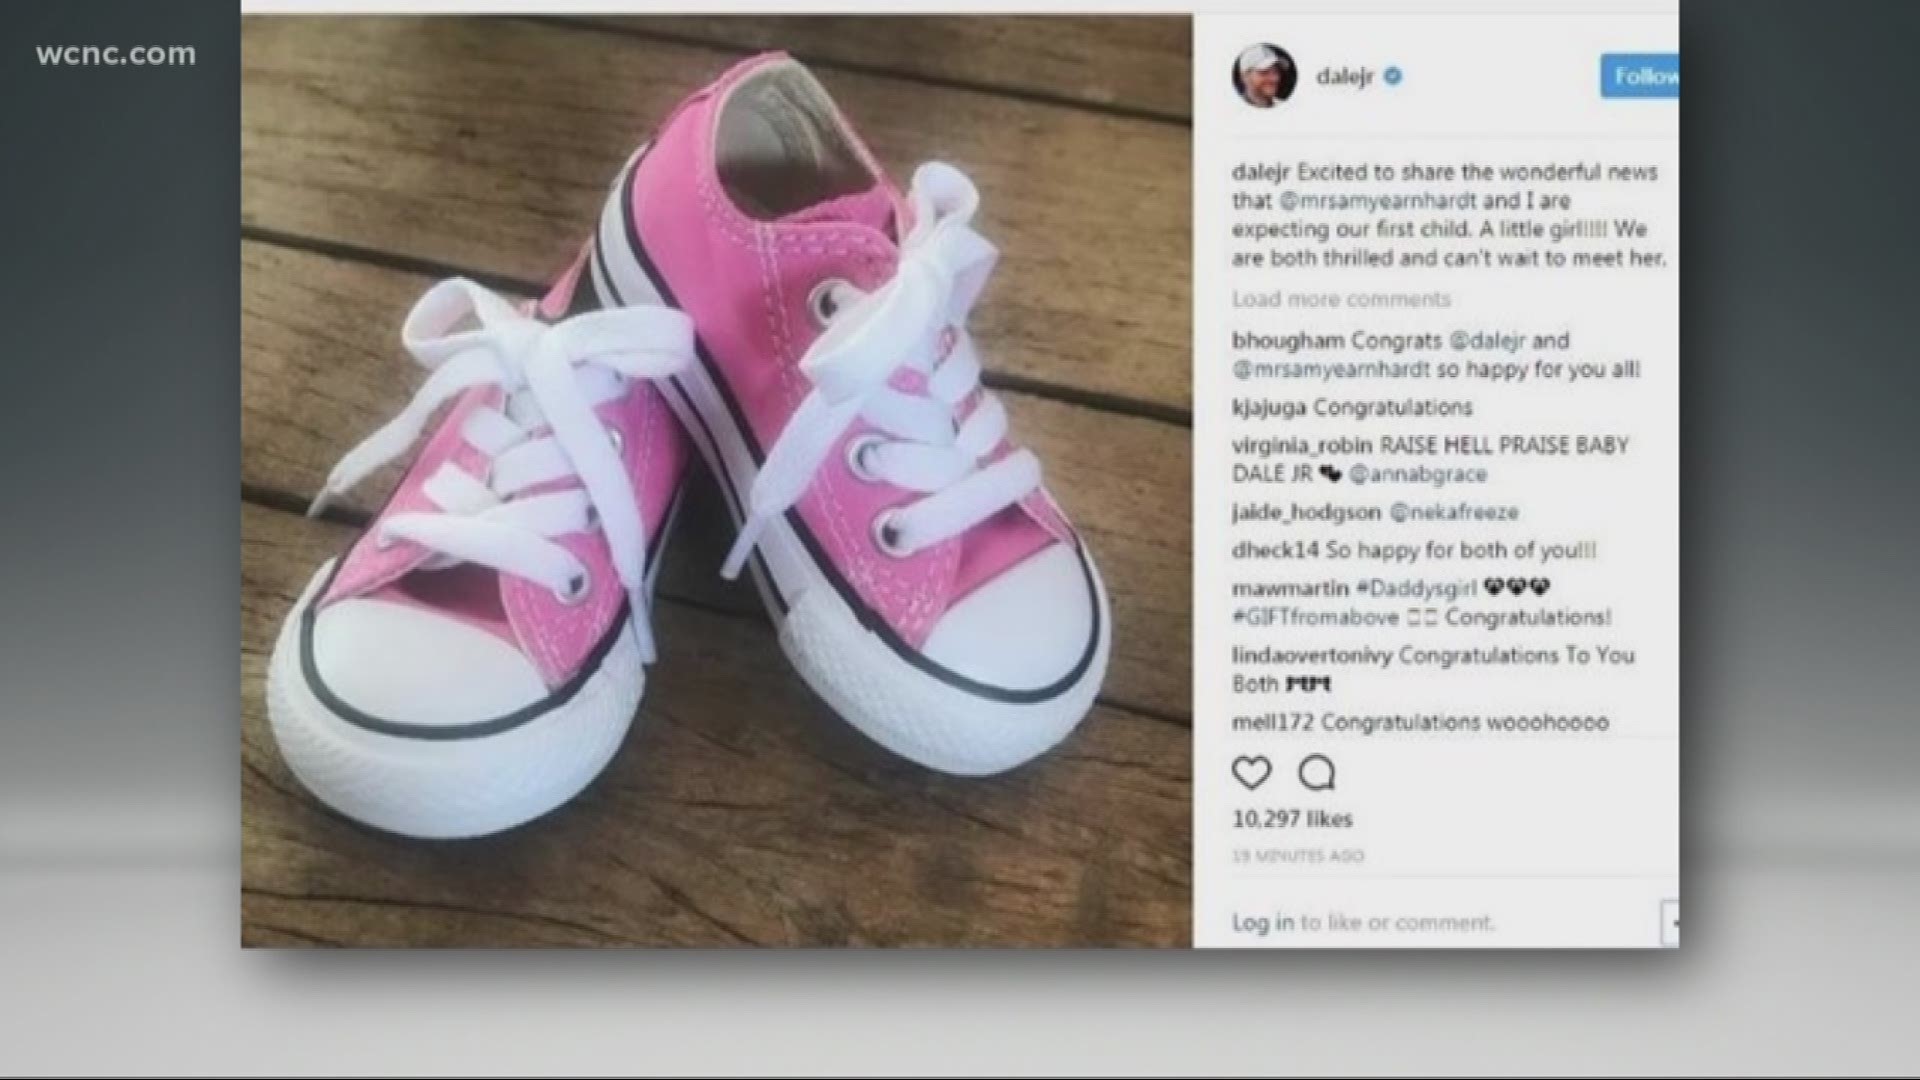 NASCAR driver Dale Earnhardt Jr. sent shockwaves through the social media world when he announced Monday that he and wife Amy are expecting a baby girl.